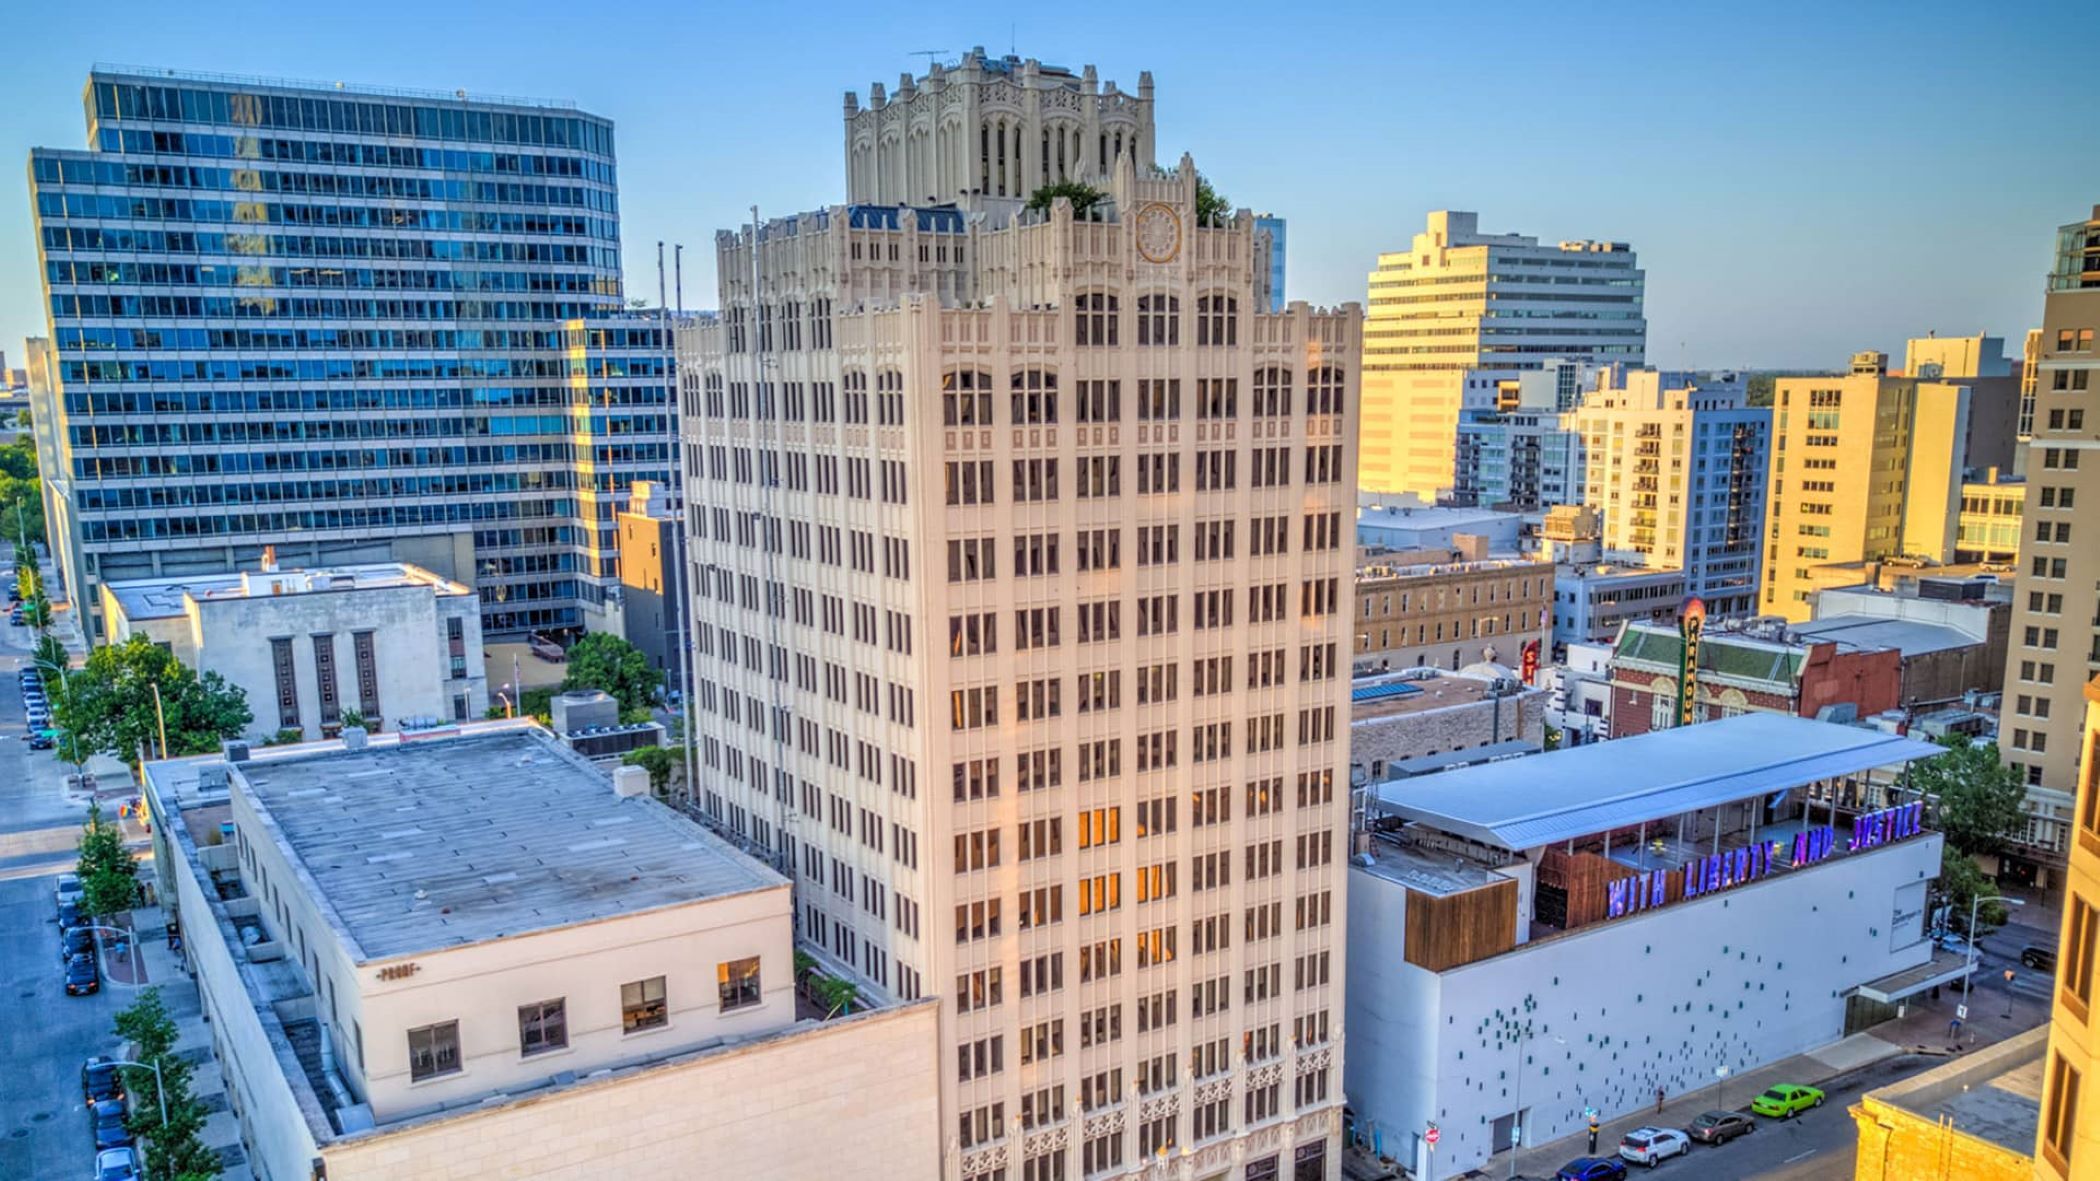 San Antonio-based Jefferson Bank has opened a location at Norwood Tower in downtown Austin, Texas. (CoStar)